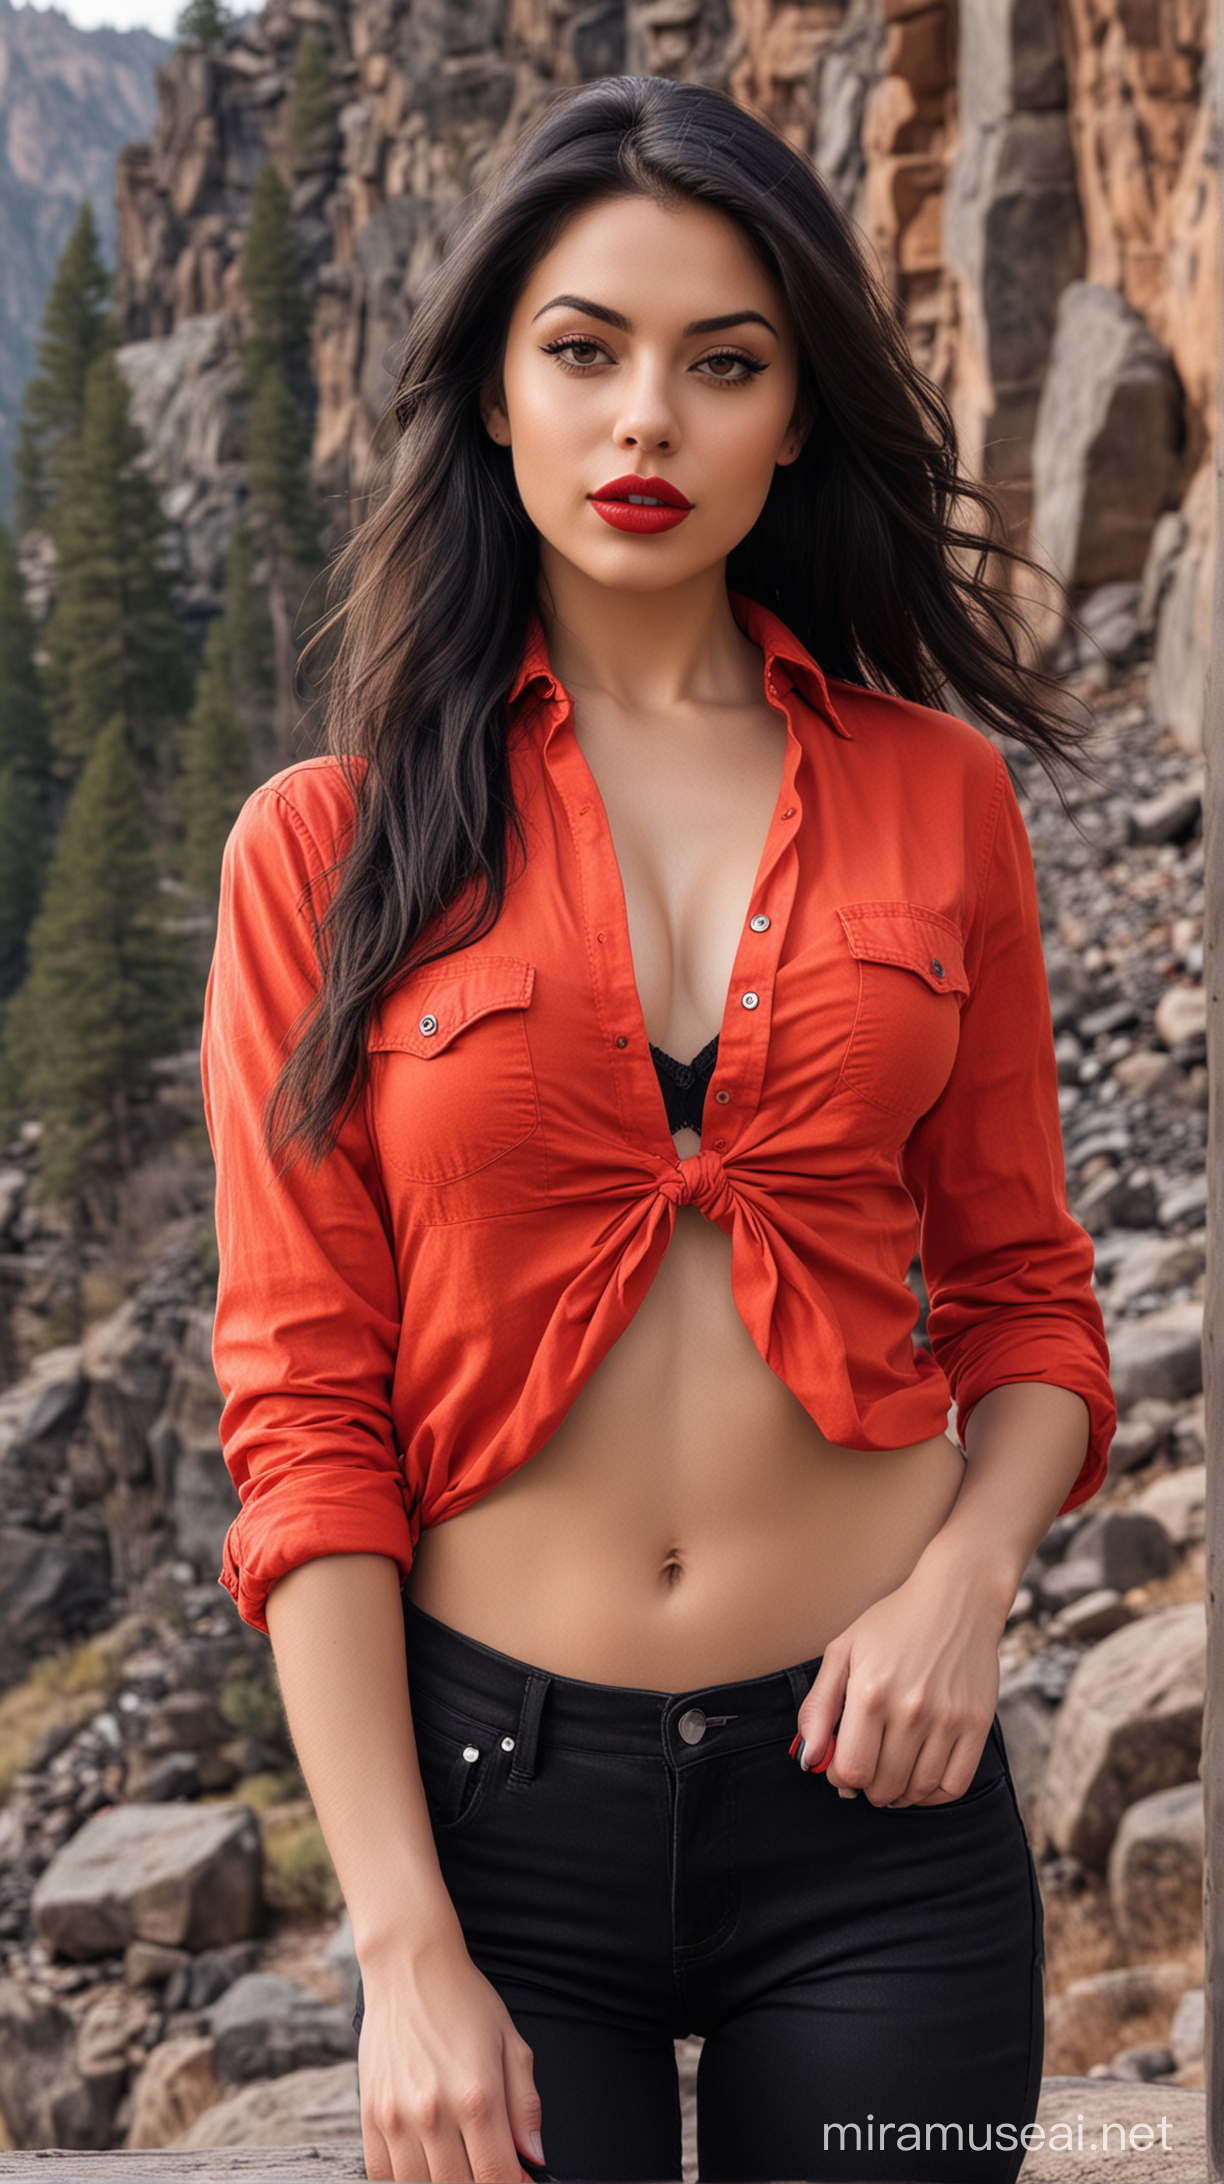 4k Ai art front view beautiful USA girl black open hair red lipstick ear tops black jeans and orange and red shirt with bra in usa rocky mountain beauty